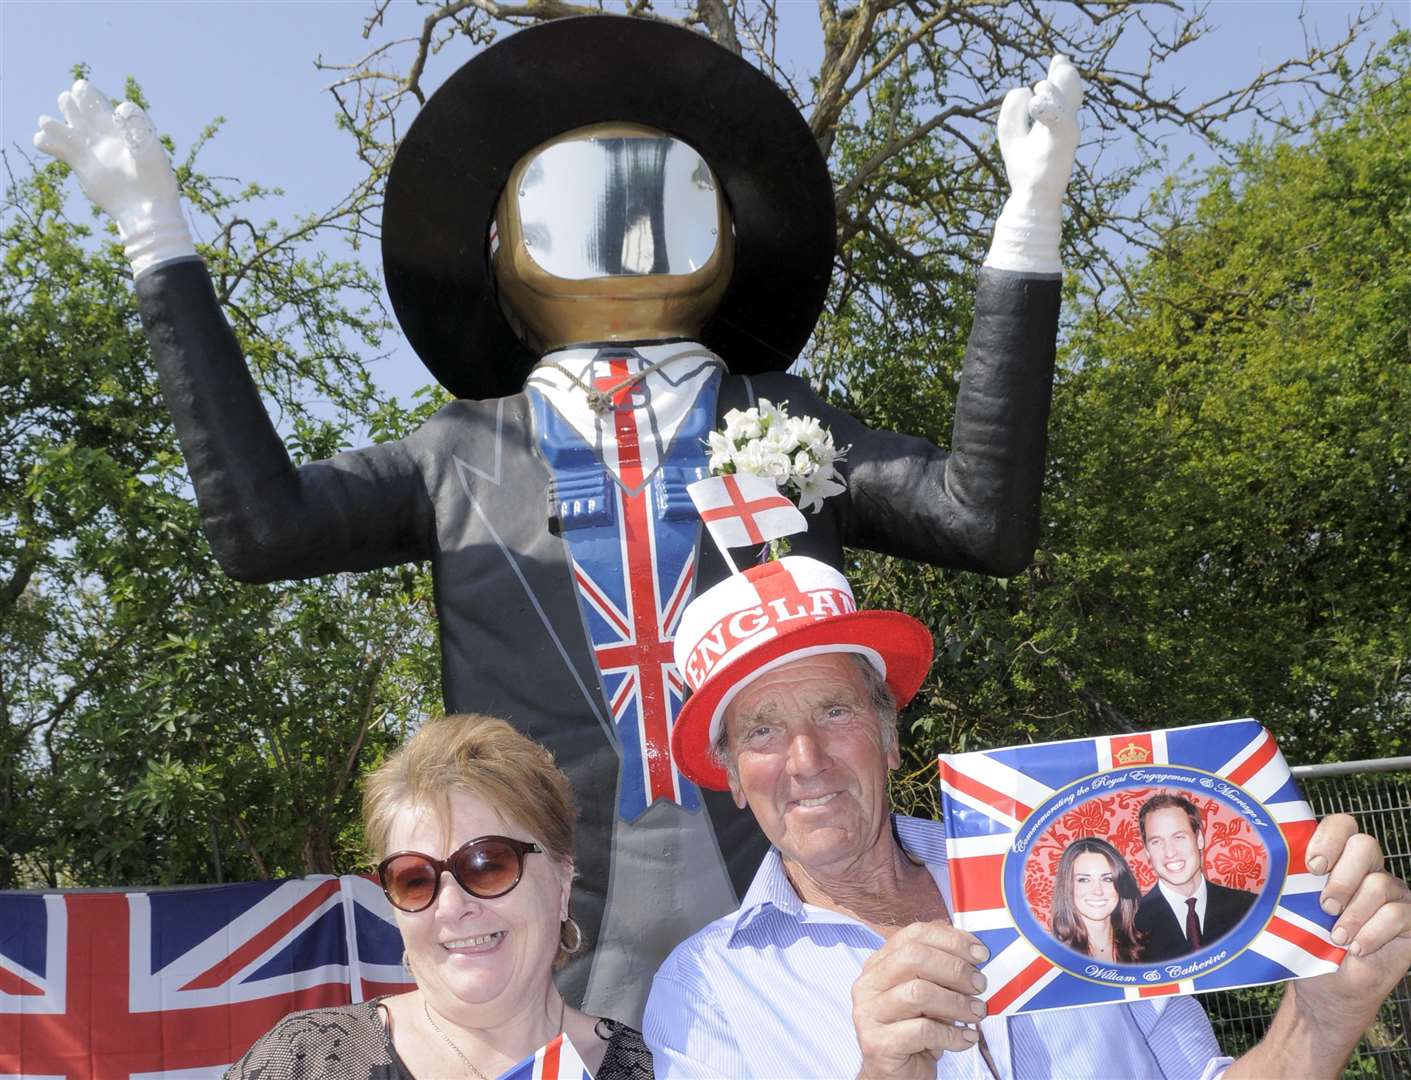 Cllr Val Harris and Dave Purssord with the Big Man, painted as a groom, ahead of the Royal Wedding in 2011